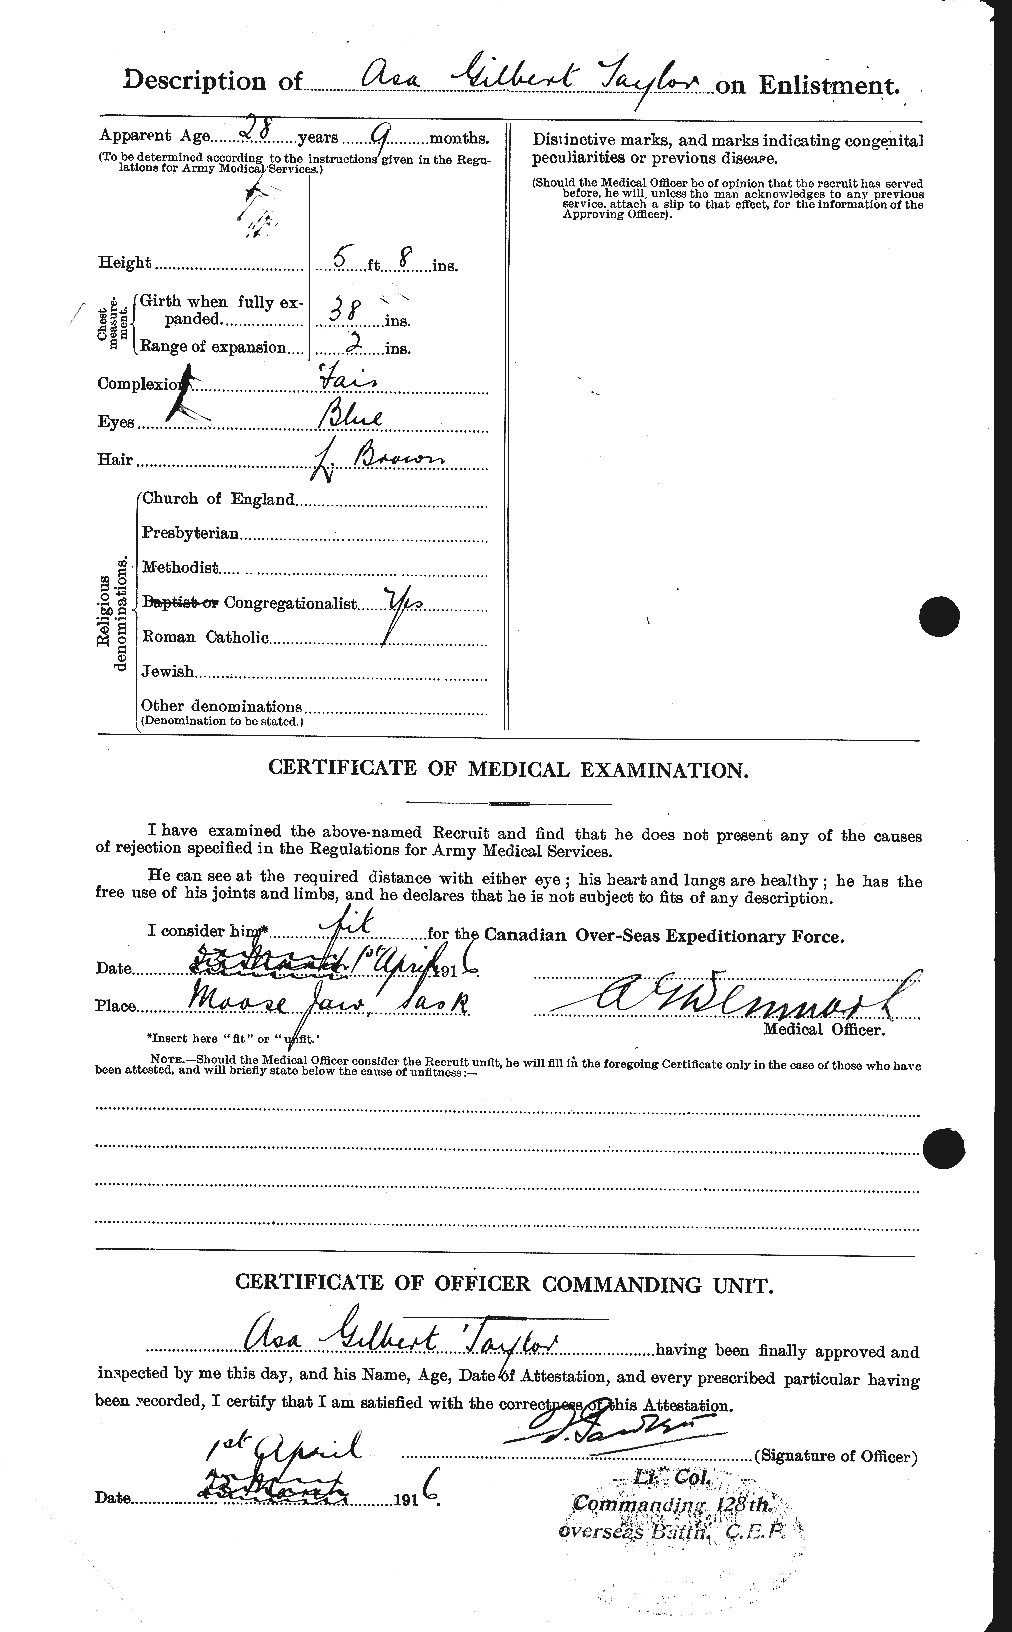 Personnel Records of the First World War - CEF 626752b